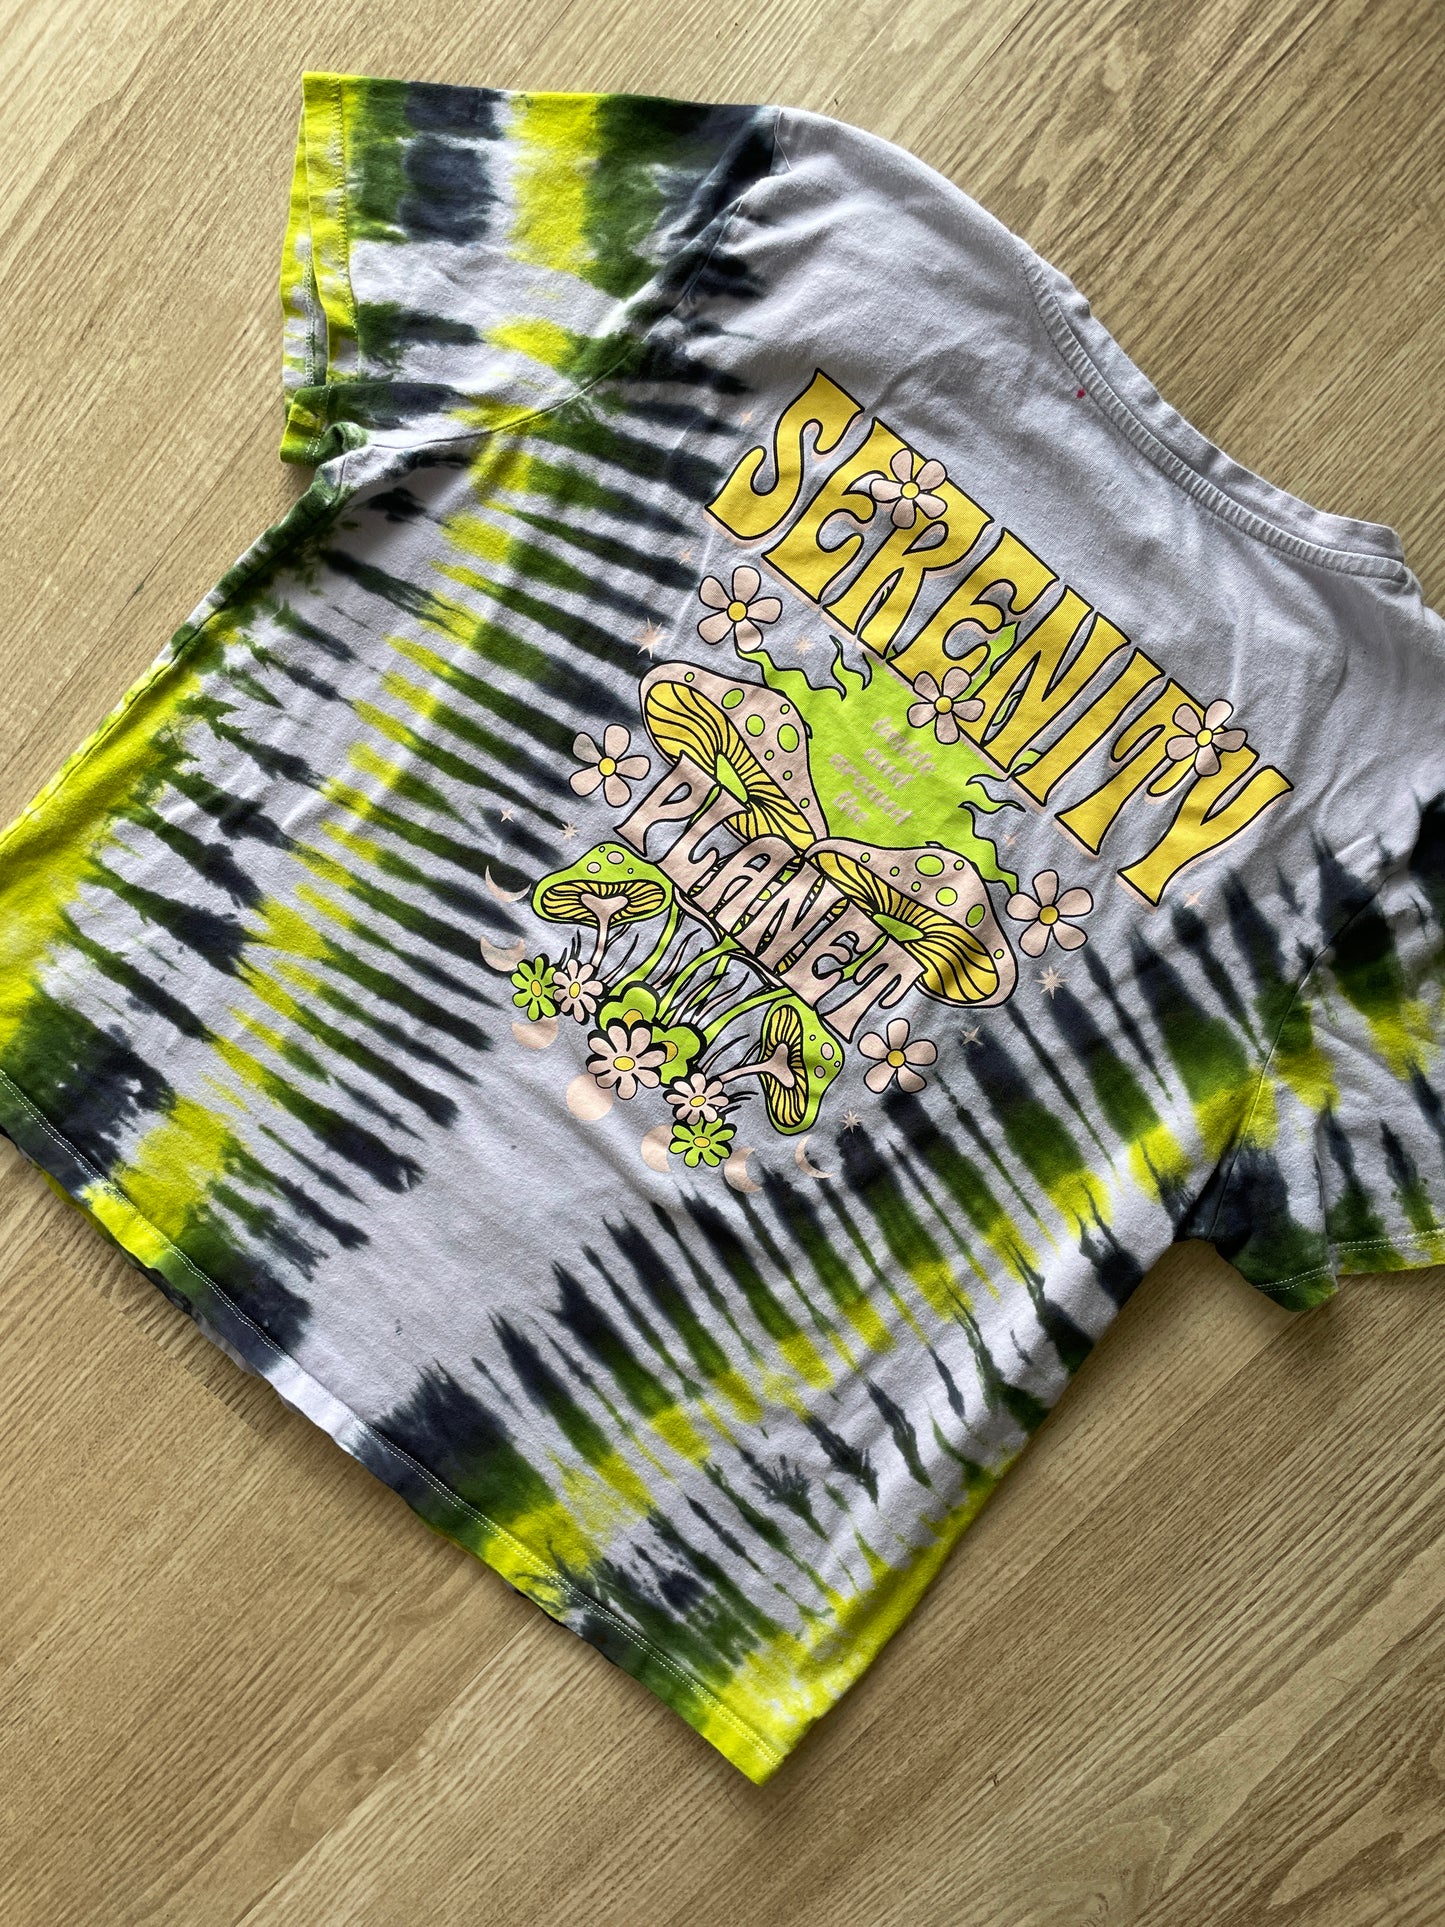 XL Women’s Serenity Planet Mushrooms Tie Dye Short Sleeve T-Shirt | One-Of-a-Kind Upcycled Purple, Green, and Black Pleated Top